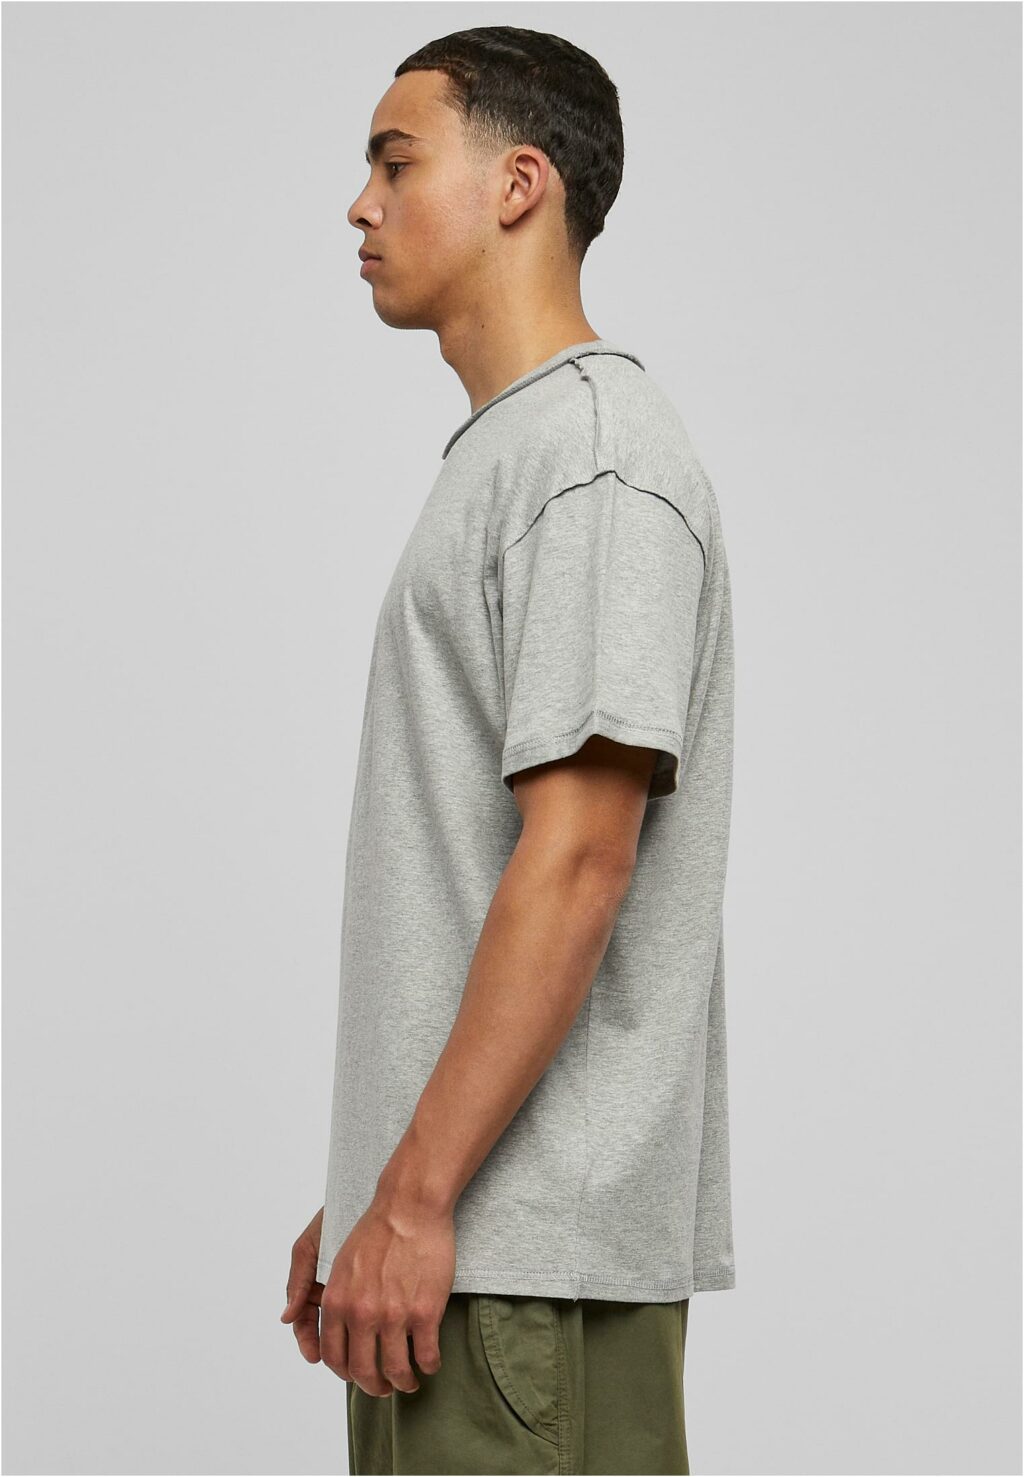 Urban Classics Oversized Inside Out Tee grey TB5935